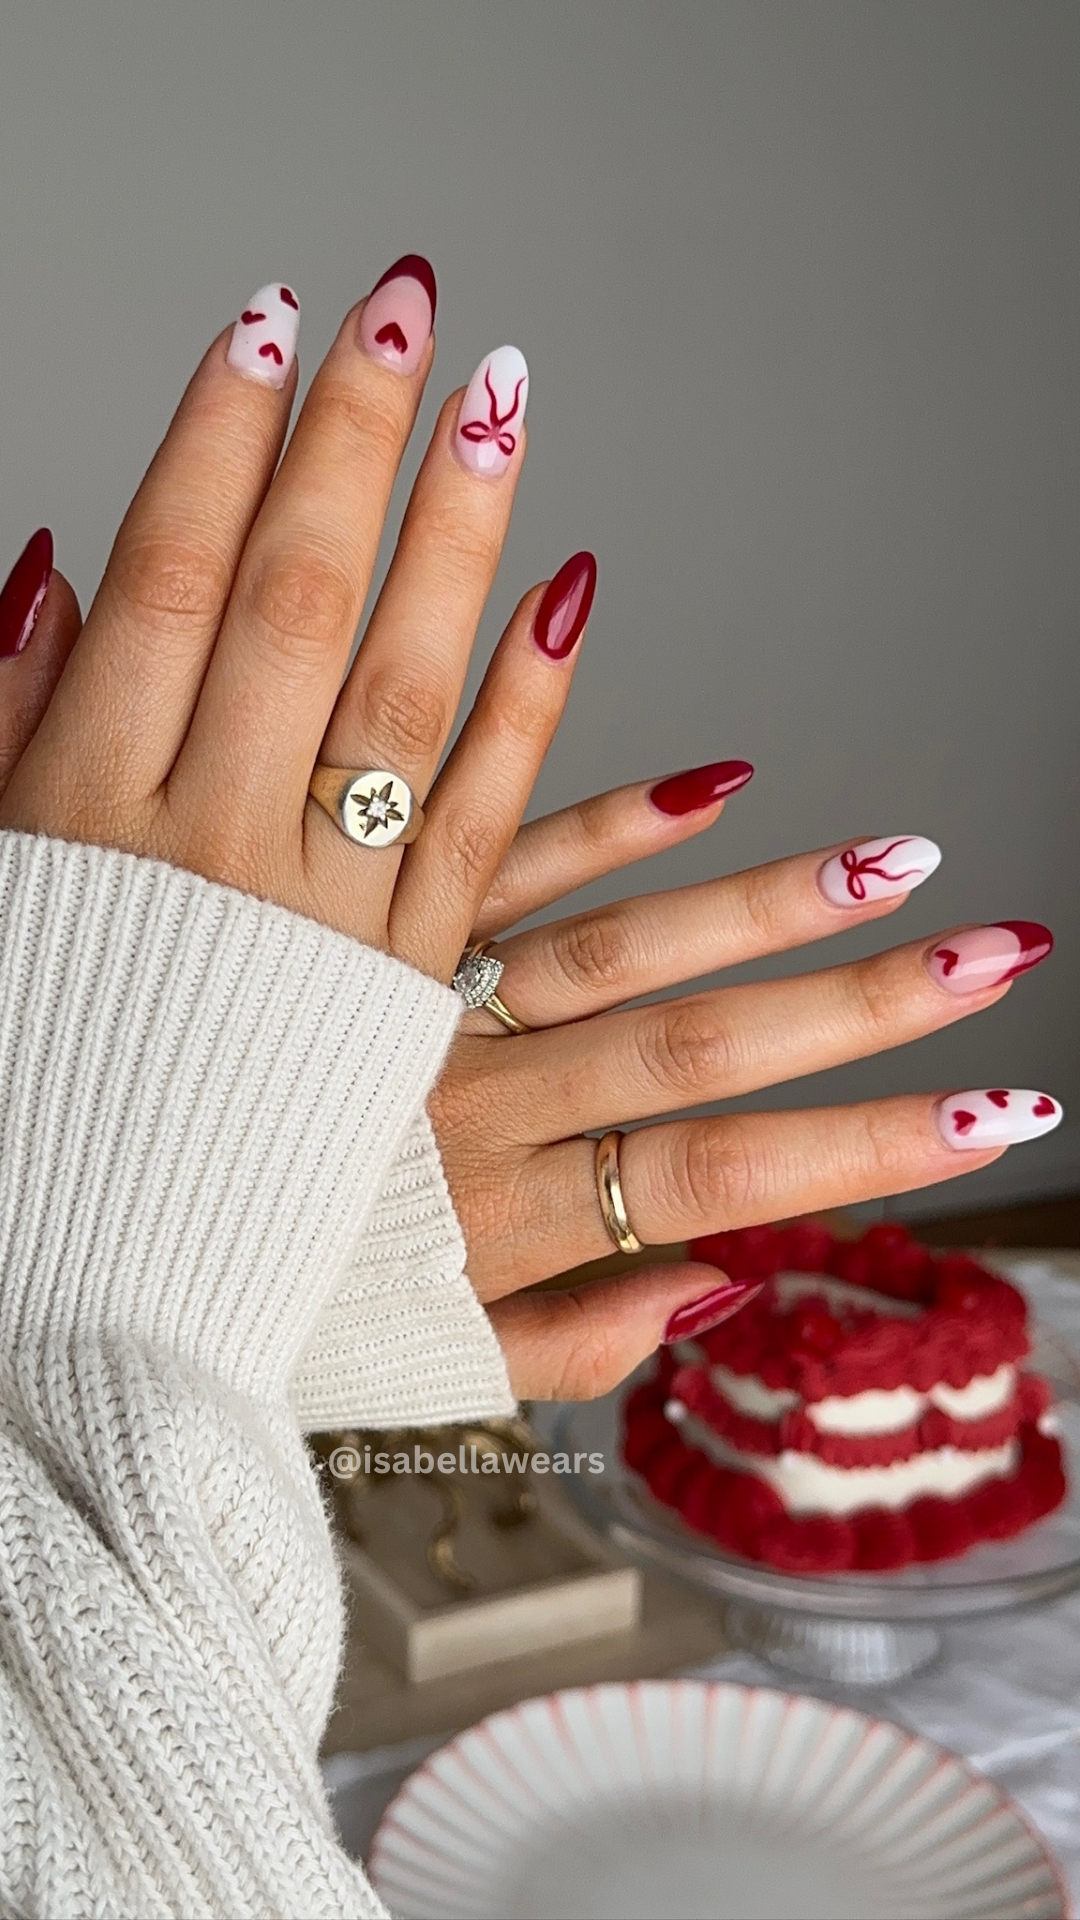 Pinky's Nails and Beauty - 𝕊𝕡𝕣𝕖𝕒𝕕 𝕥𝕙𝕖 𝕃𝕠𝕧𝕖 ❤️ Such a simple  design but absolutely loving these tiny dark red hearts on these acrylics  for @hayleypexton_mindsetmentor 😍 Who says you can only